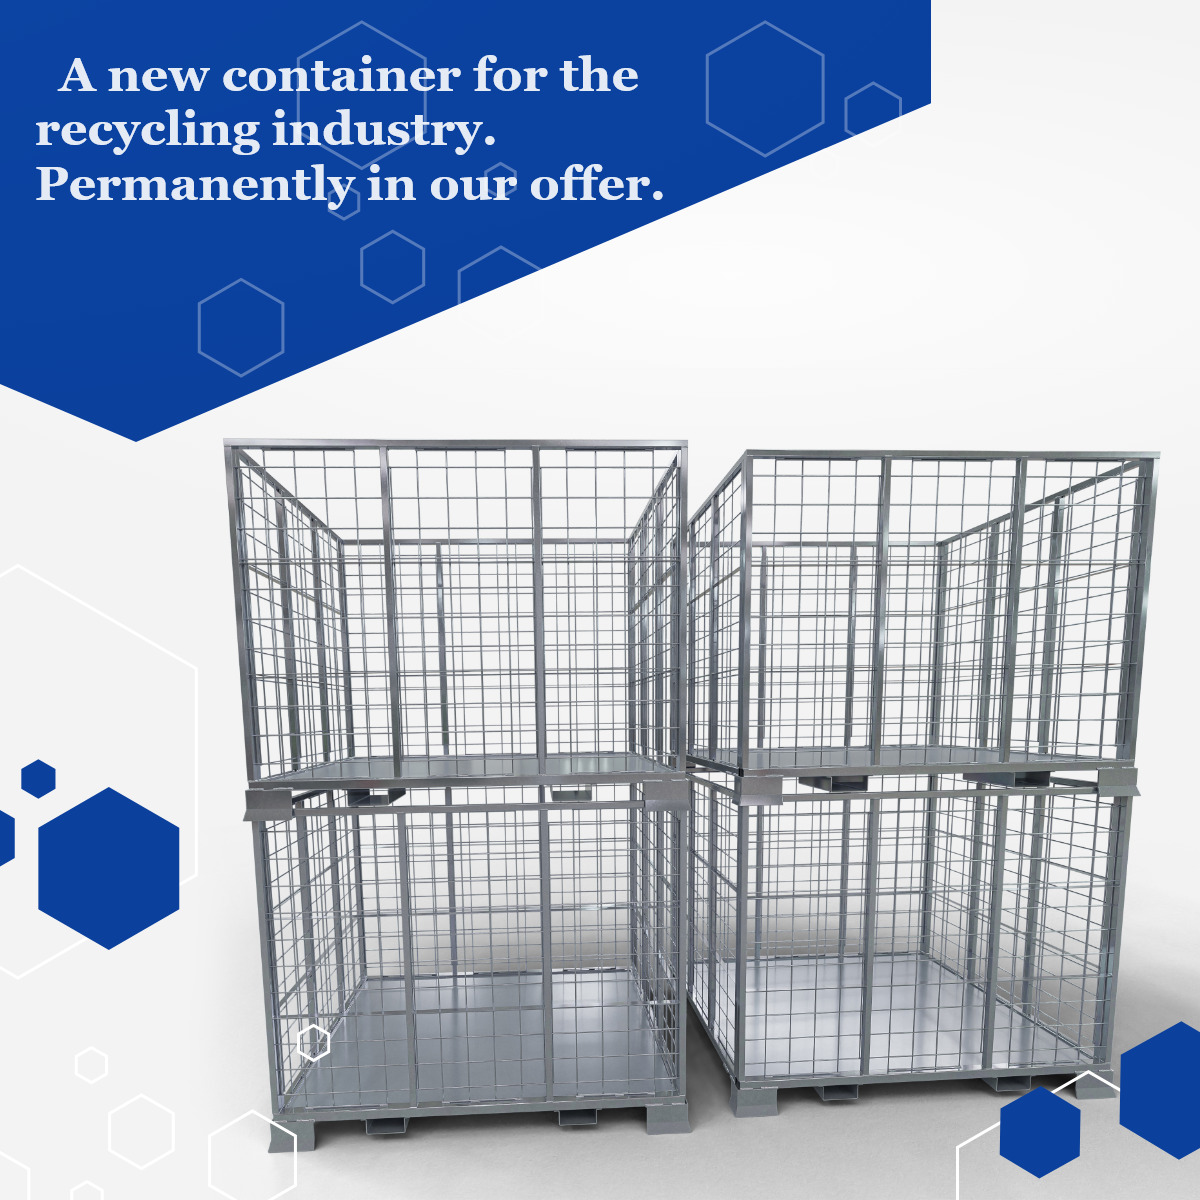 New container for the Recycling Industry with a solid profile structure.